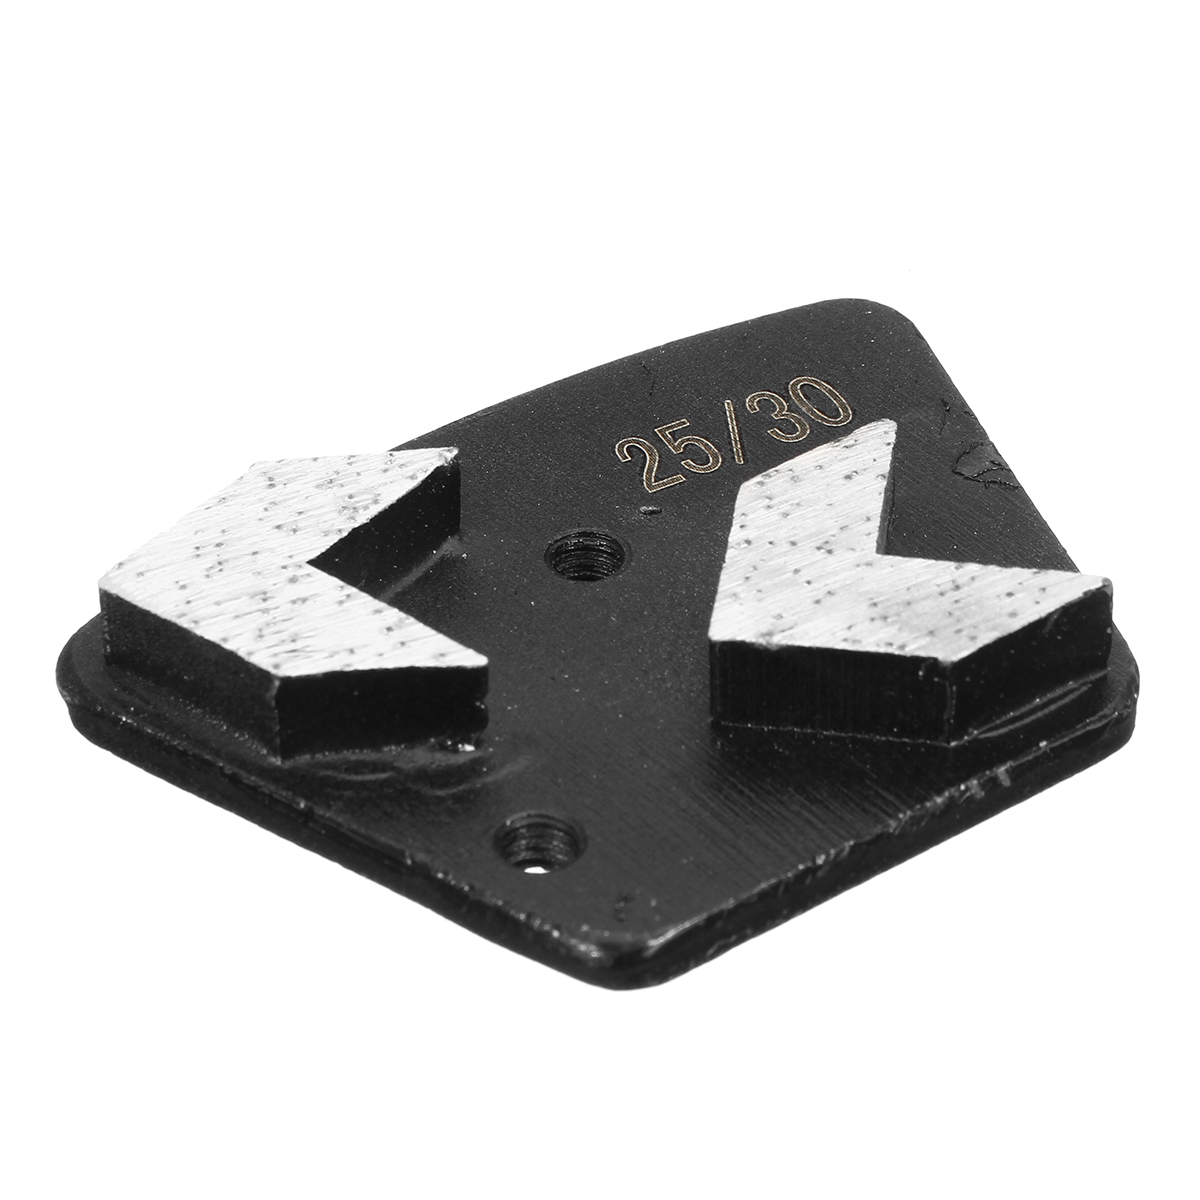 2530-Grit-Medium-Bond-Plate-Trapezoid-Grinding-Disc-for-Bolt-On-Grinders-1349216-4